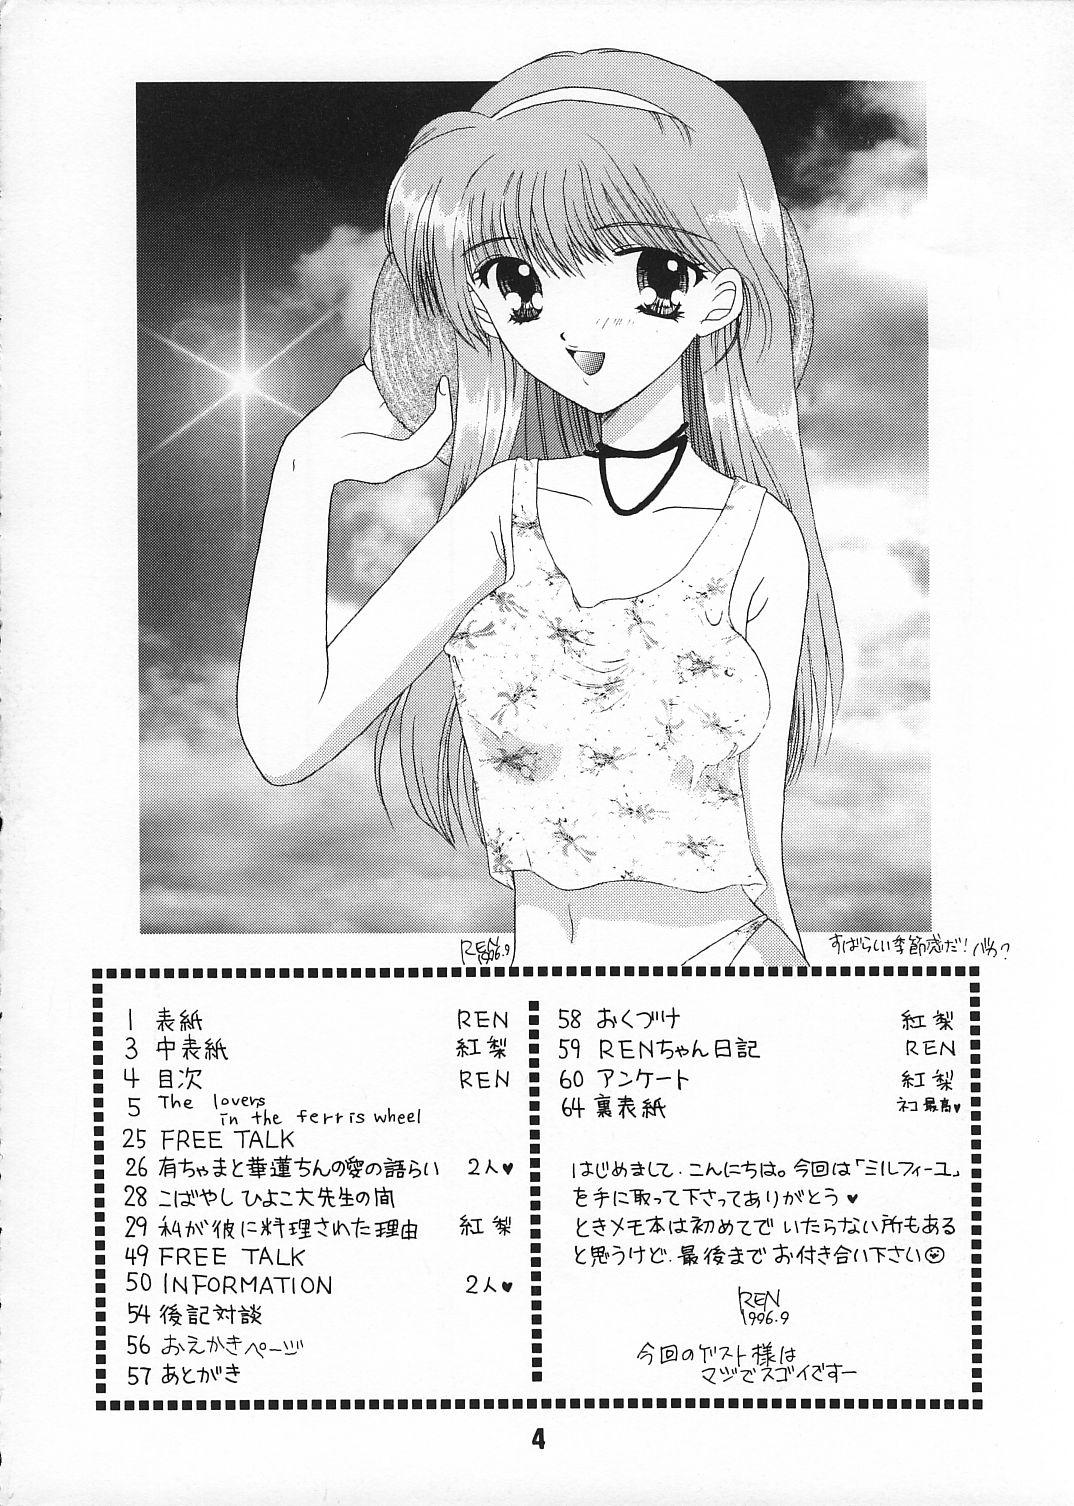 Porn Star Mille-feuille - Tokimeki memorial Young - Page 3